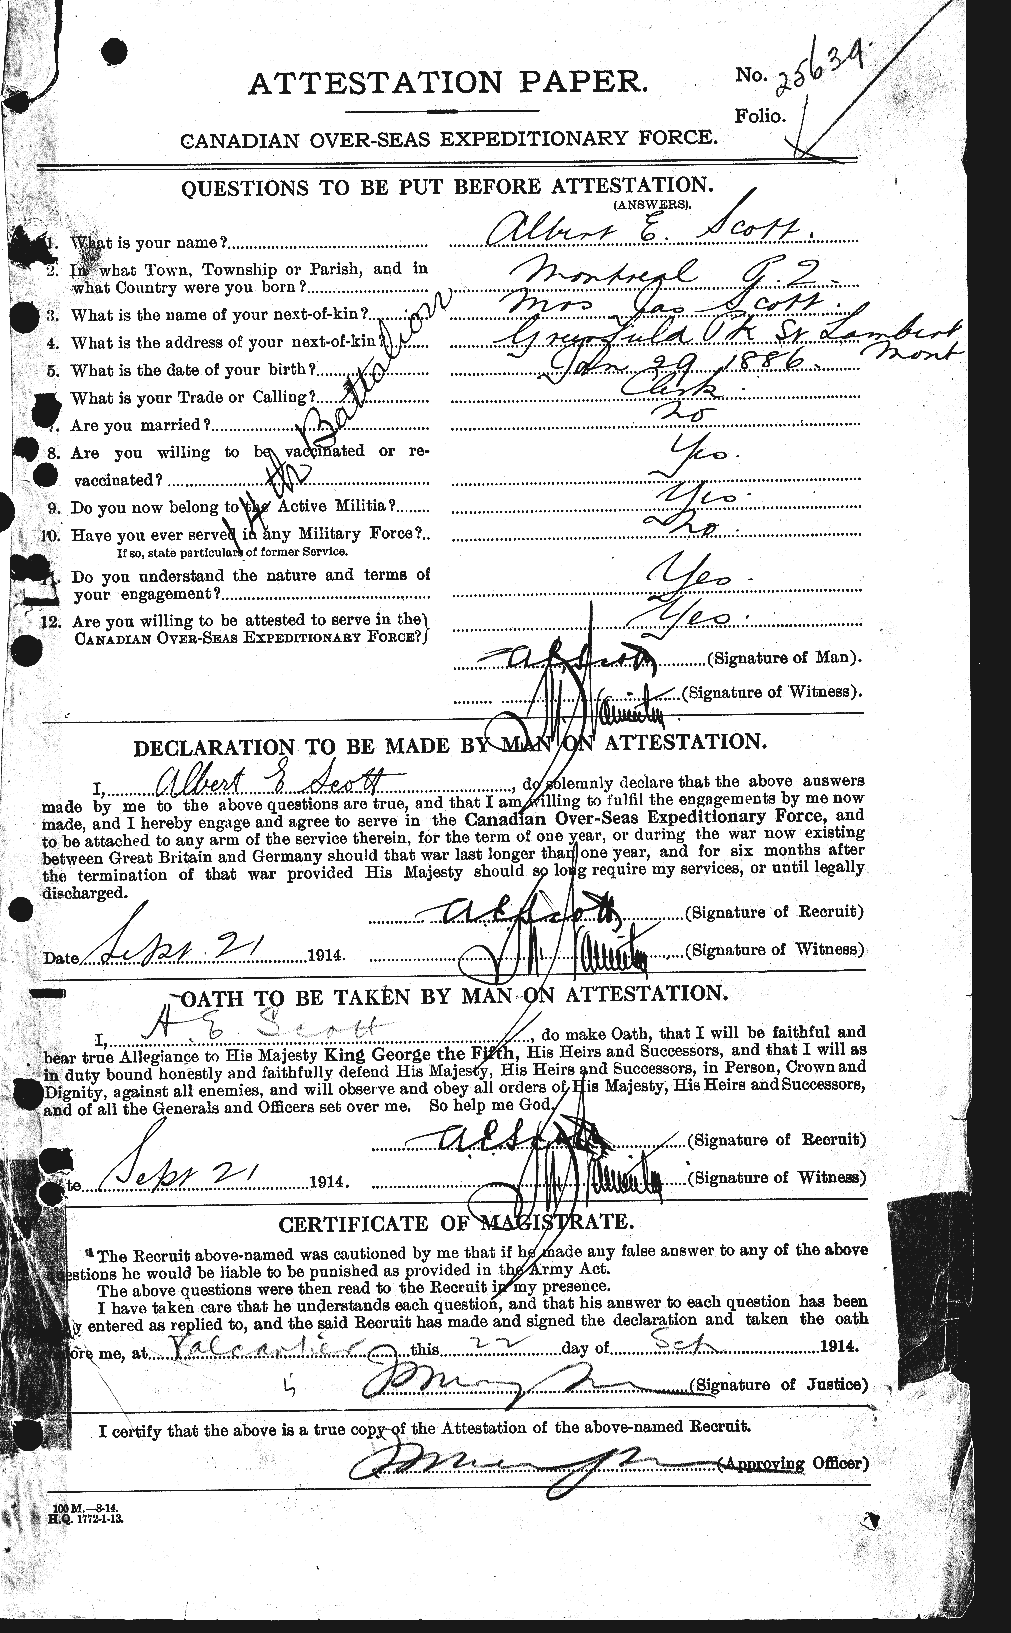 Personnel Records of the First World War - CEF 079275a